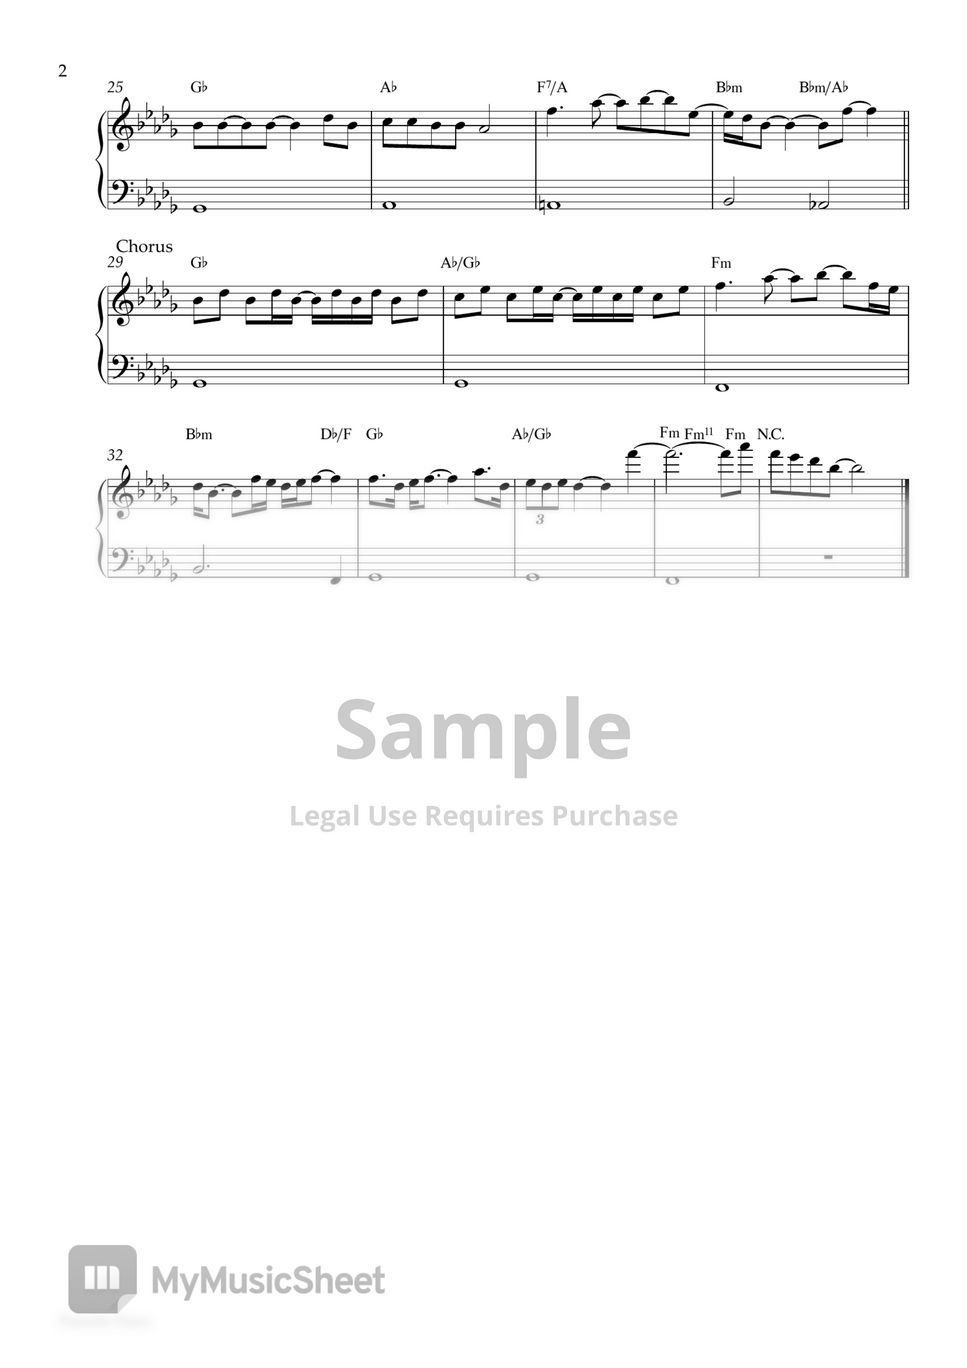 Peaches – Jack Black Sheet music for Piano (Solo) Easy